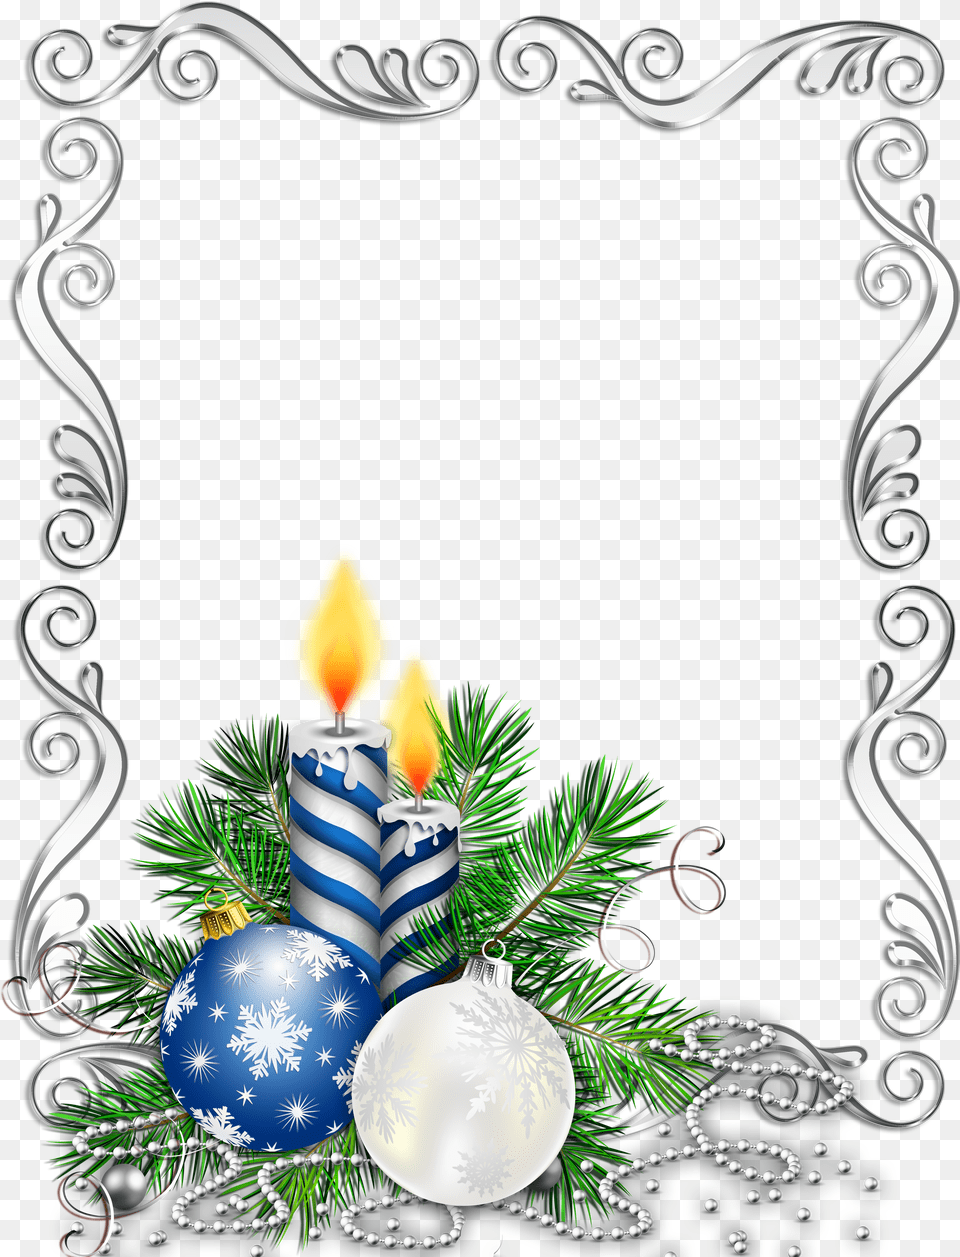 Silver Christmas Candles Picture Blue Christmas Border Design Png Image